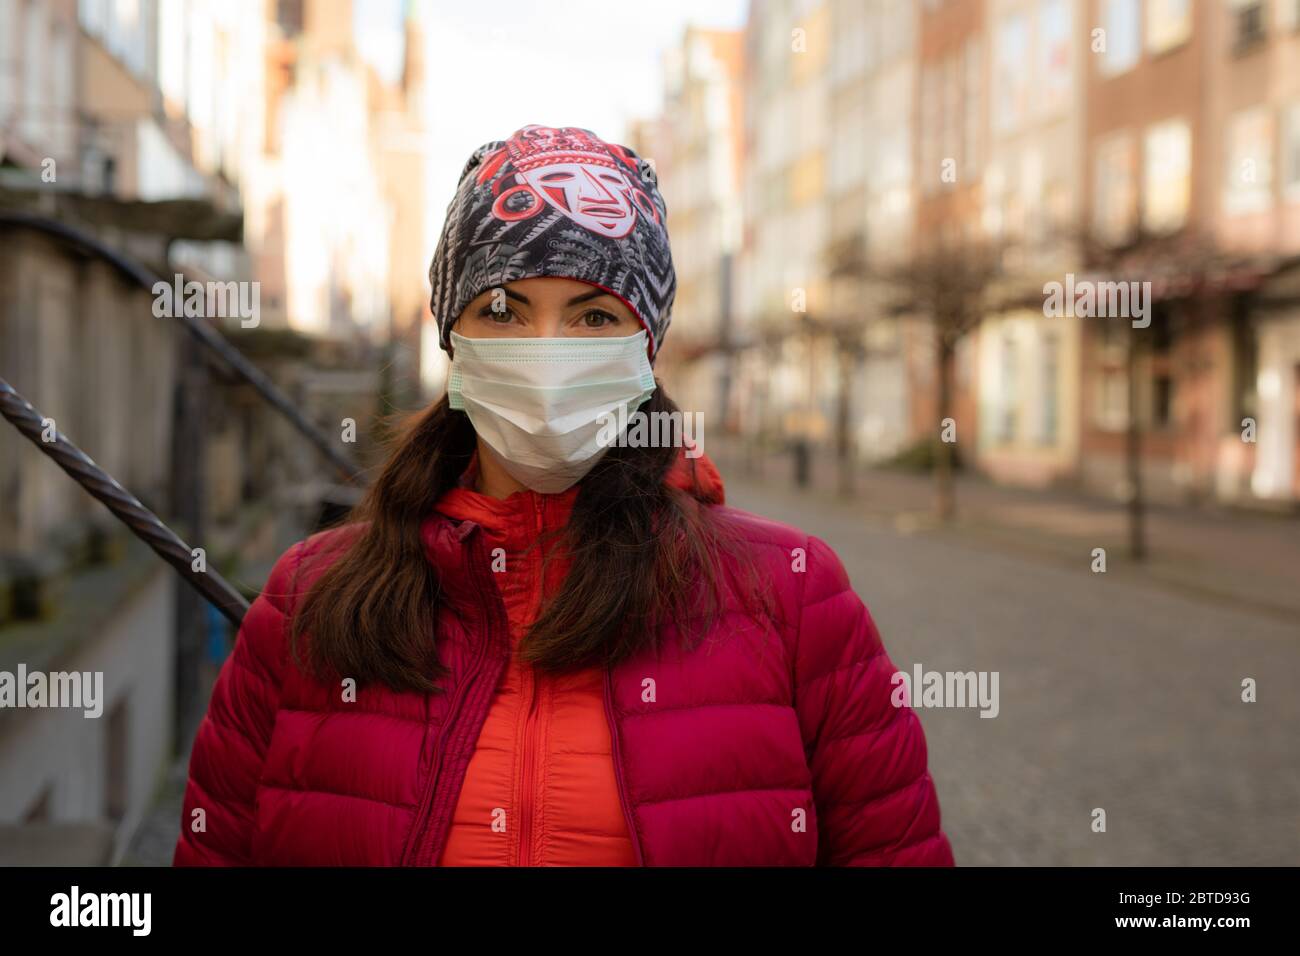 Corona virus epidemic (COVID-19) woman in mask in the city of Gdansk, Poland Stock Photo